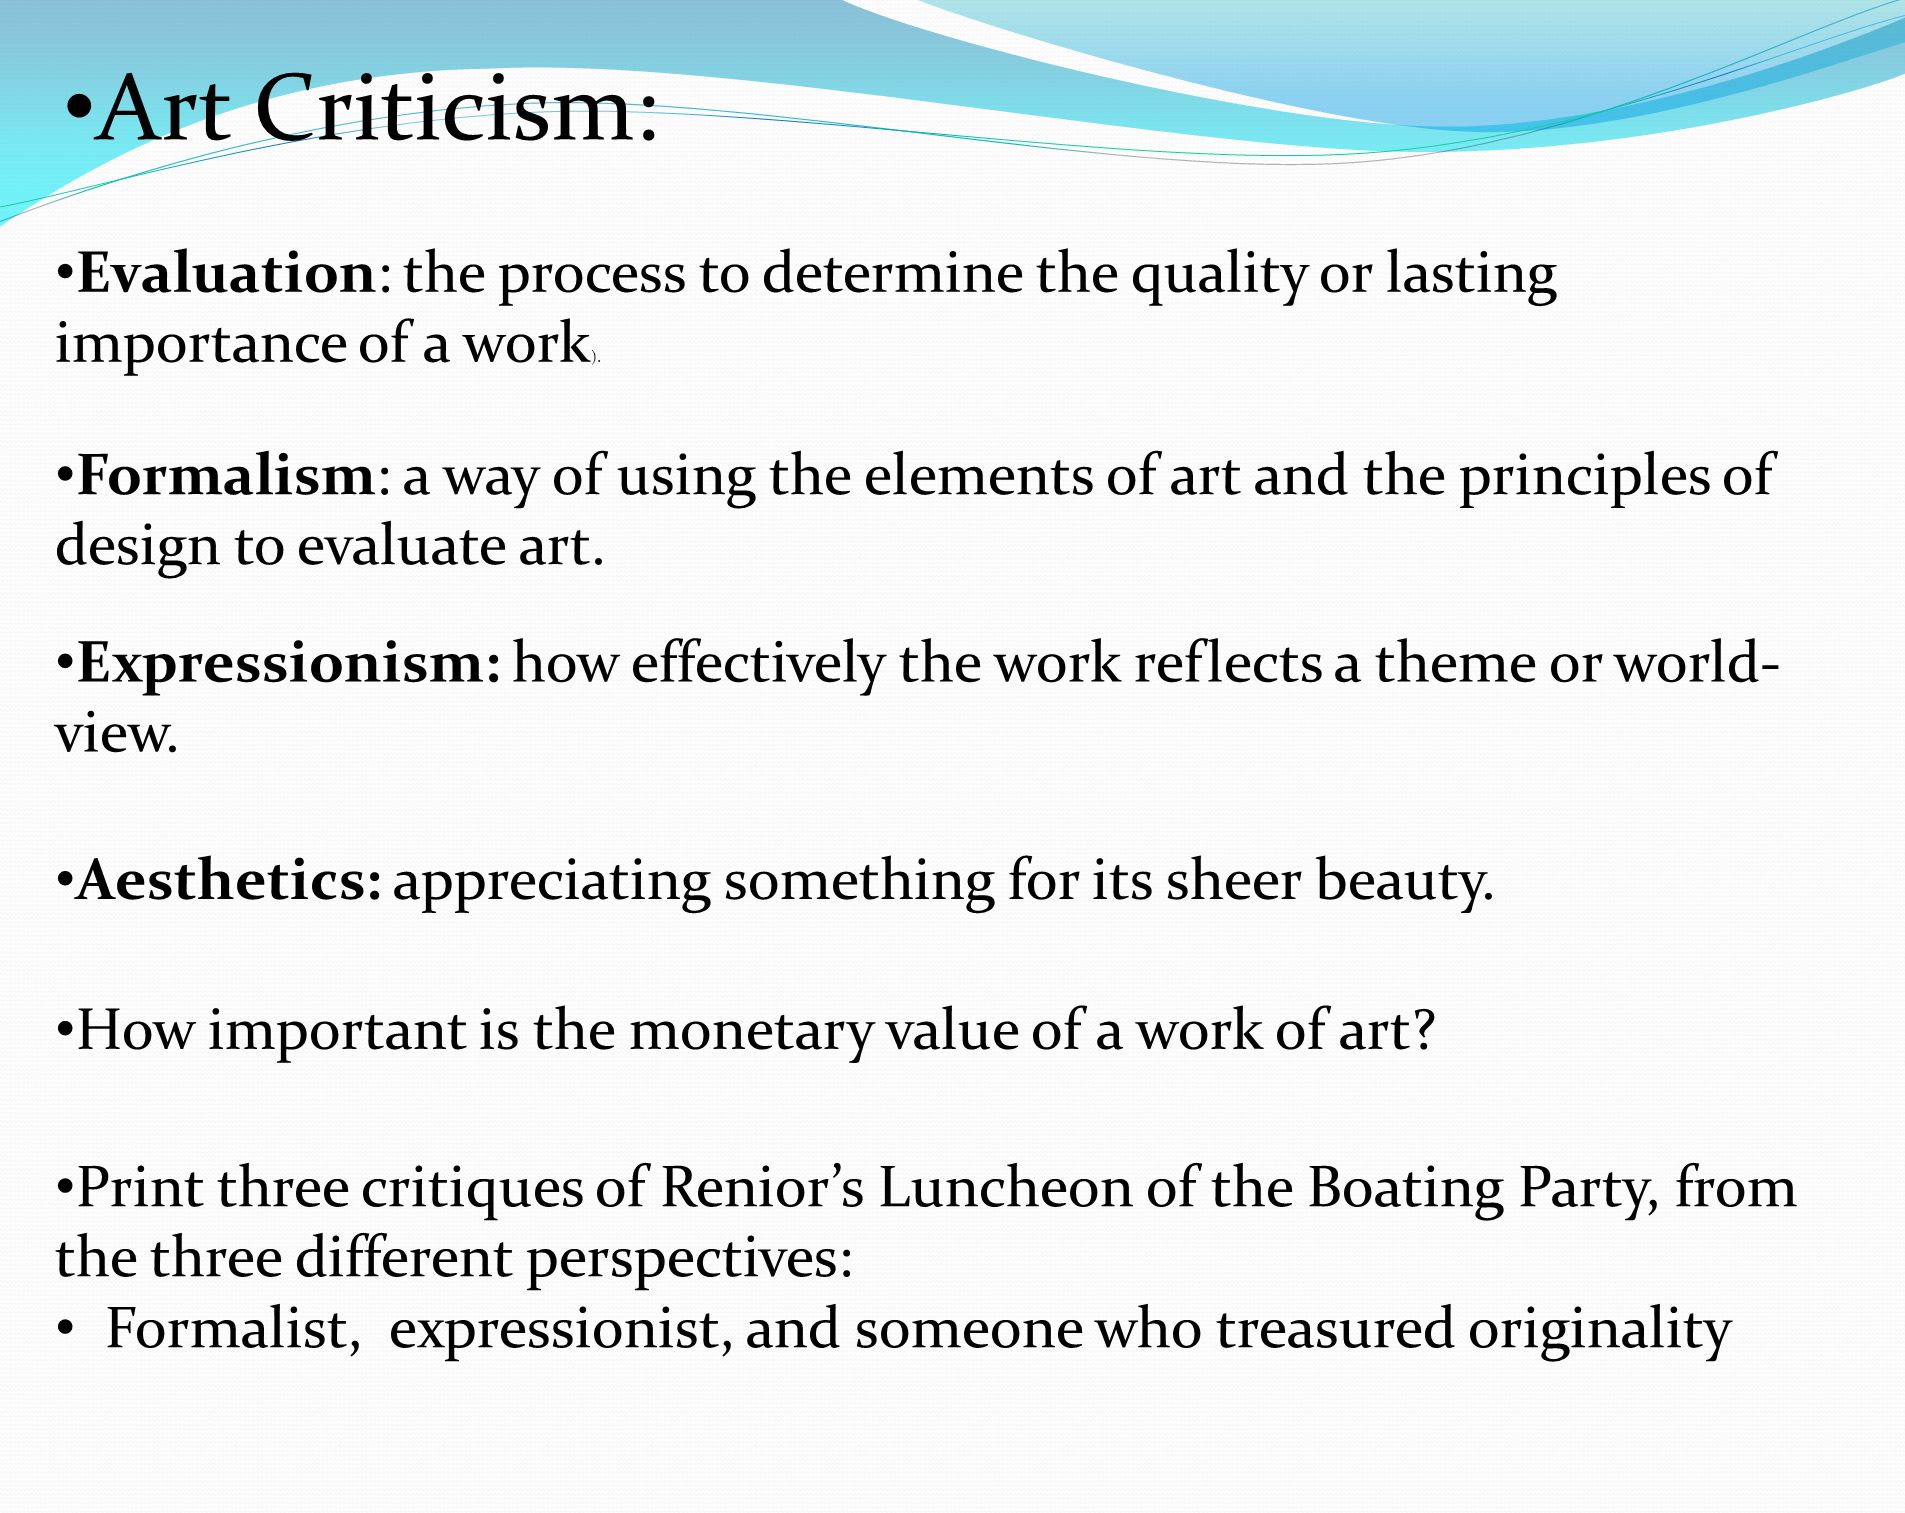 Evaluation: the process to determine the quality or lasting importance of a work ).